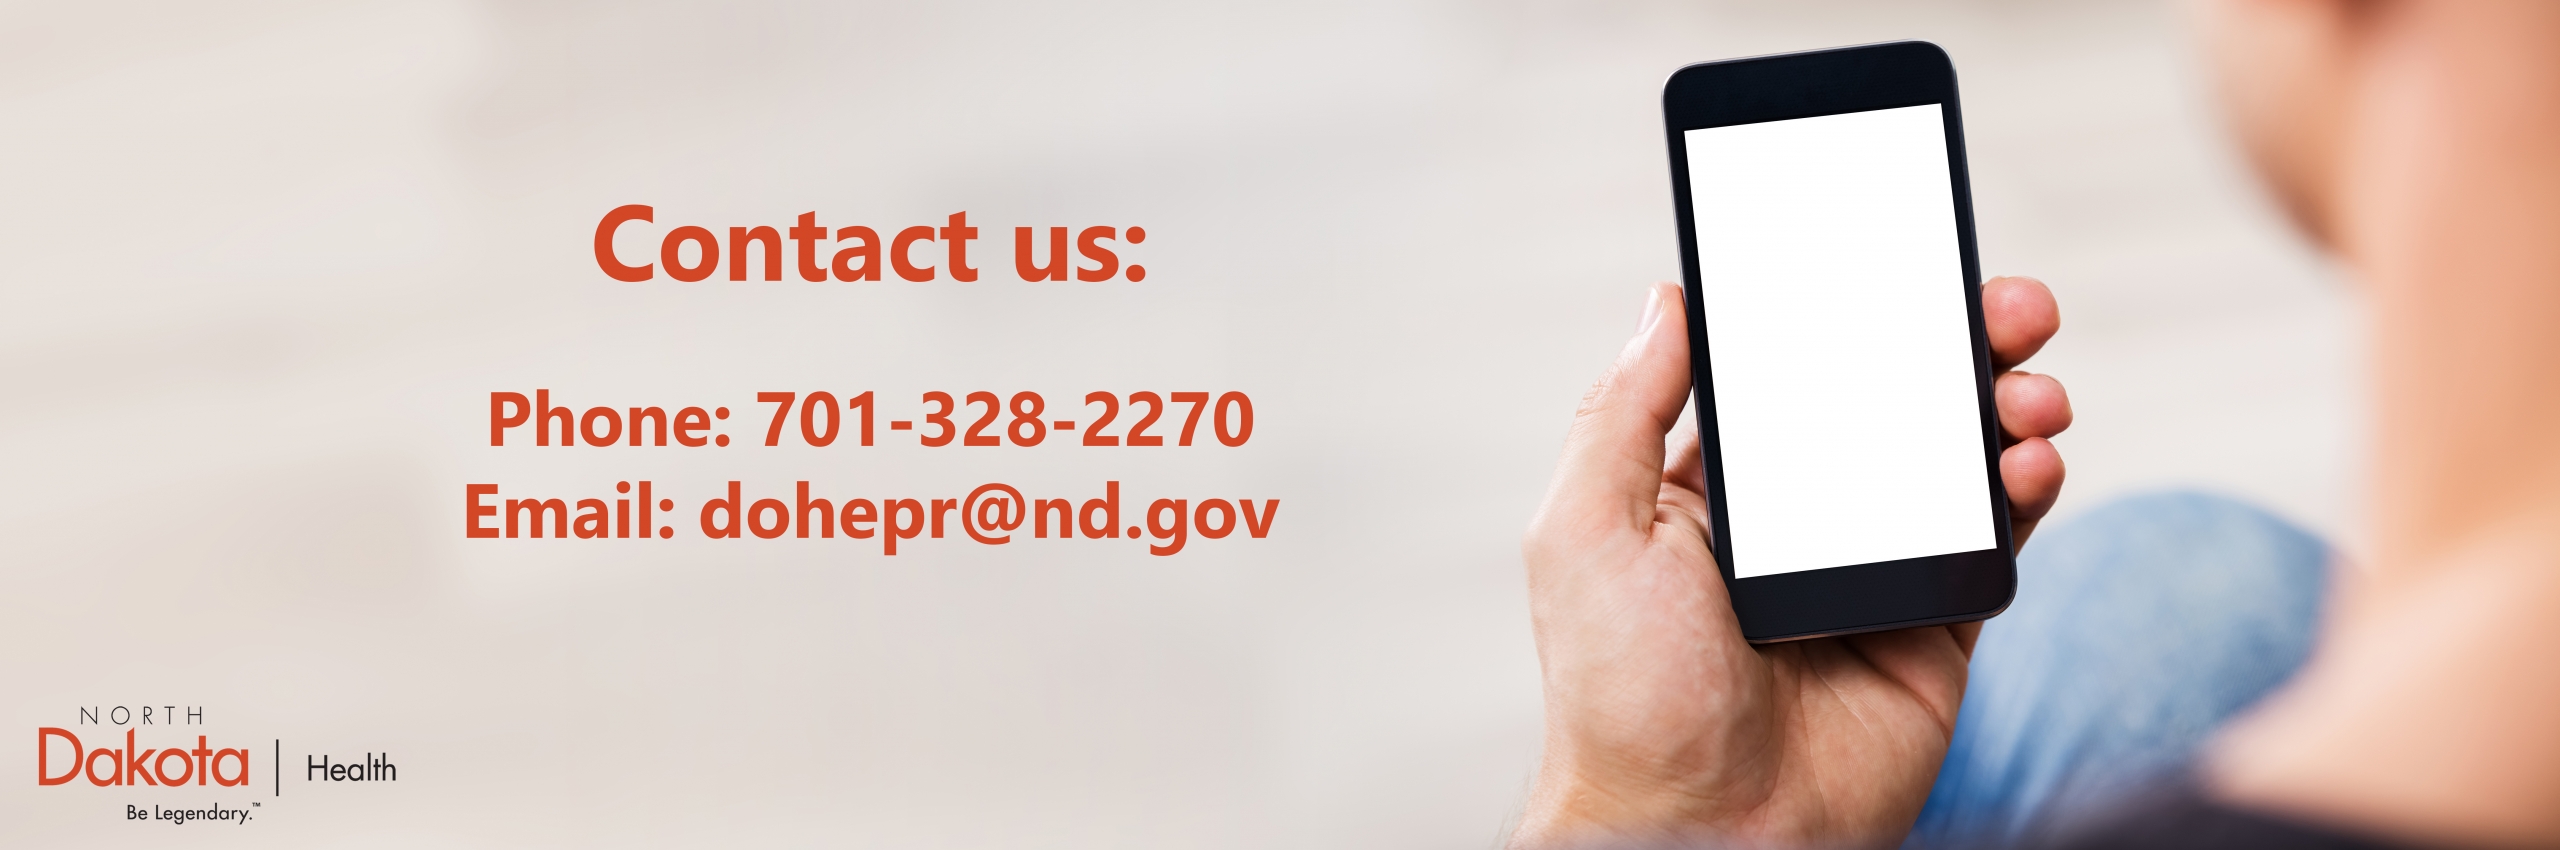 Contact us by phone: 701-328-2270 or by email: dohepr@nd.gov